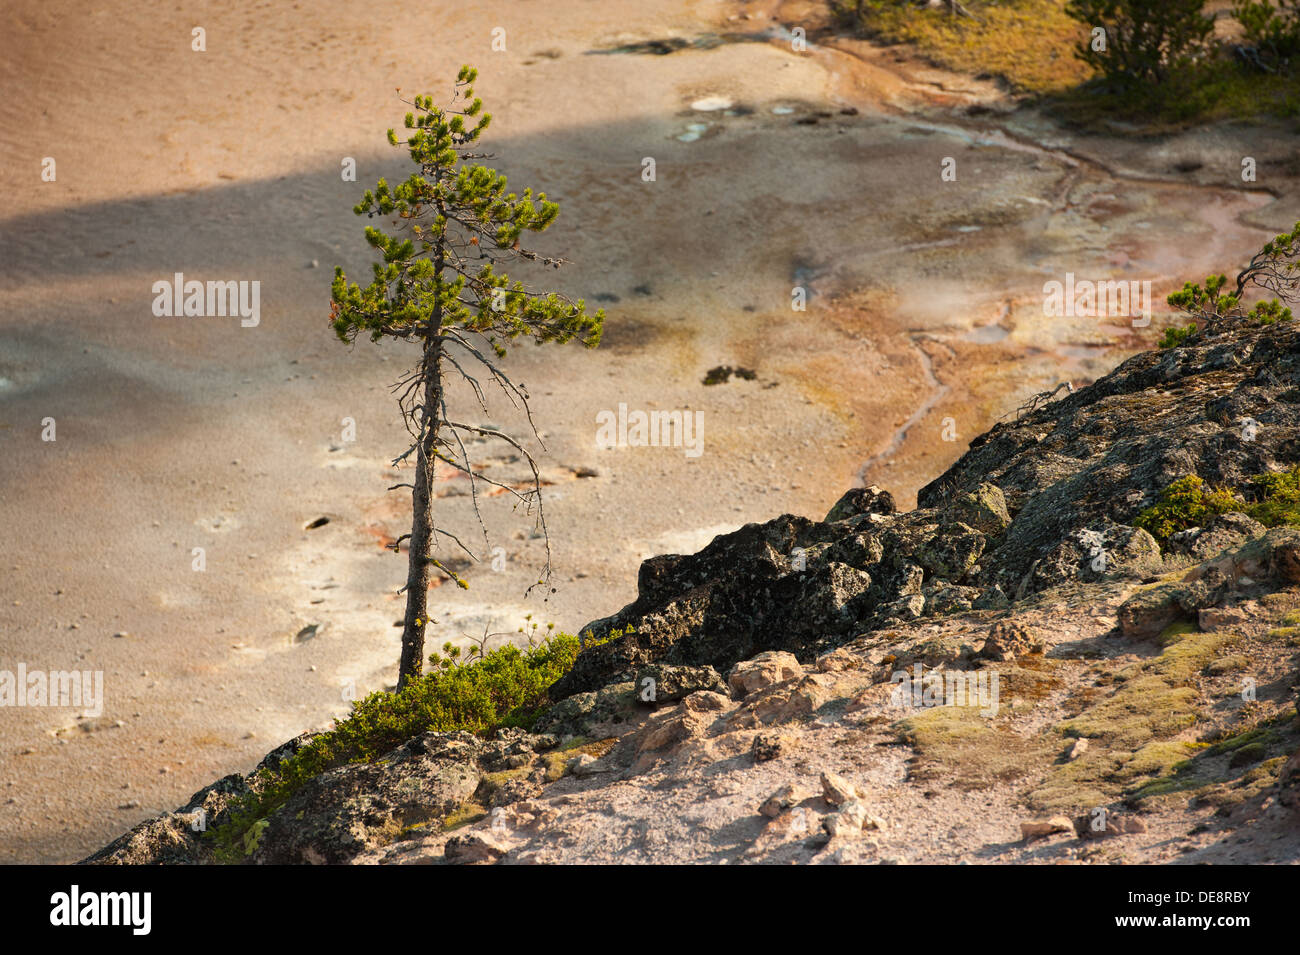 Photograph of the Artist Paint Pots area found in Yellowstone National Park, Wyoming. Stock Photo